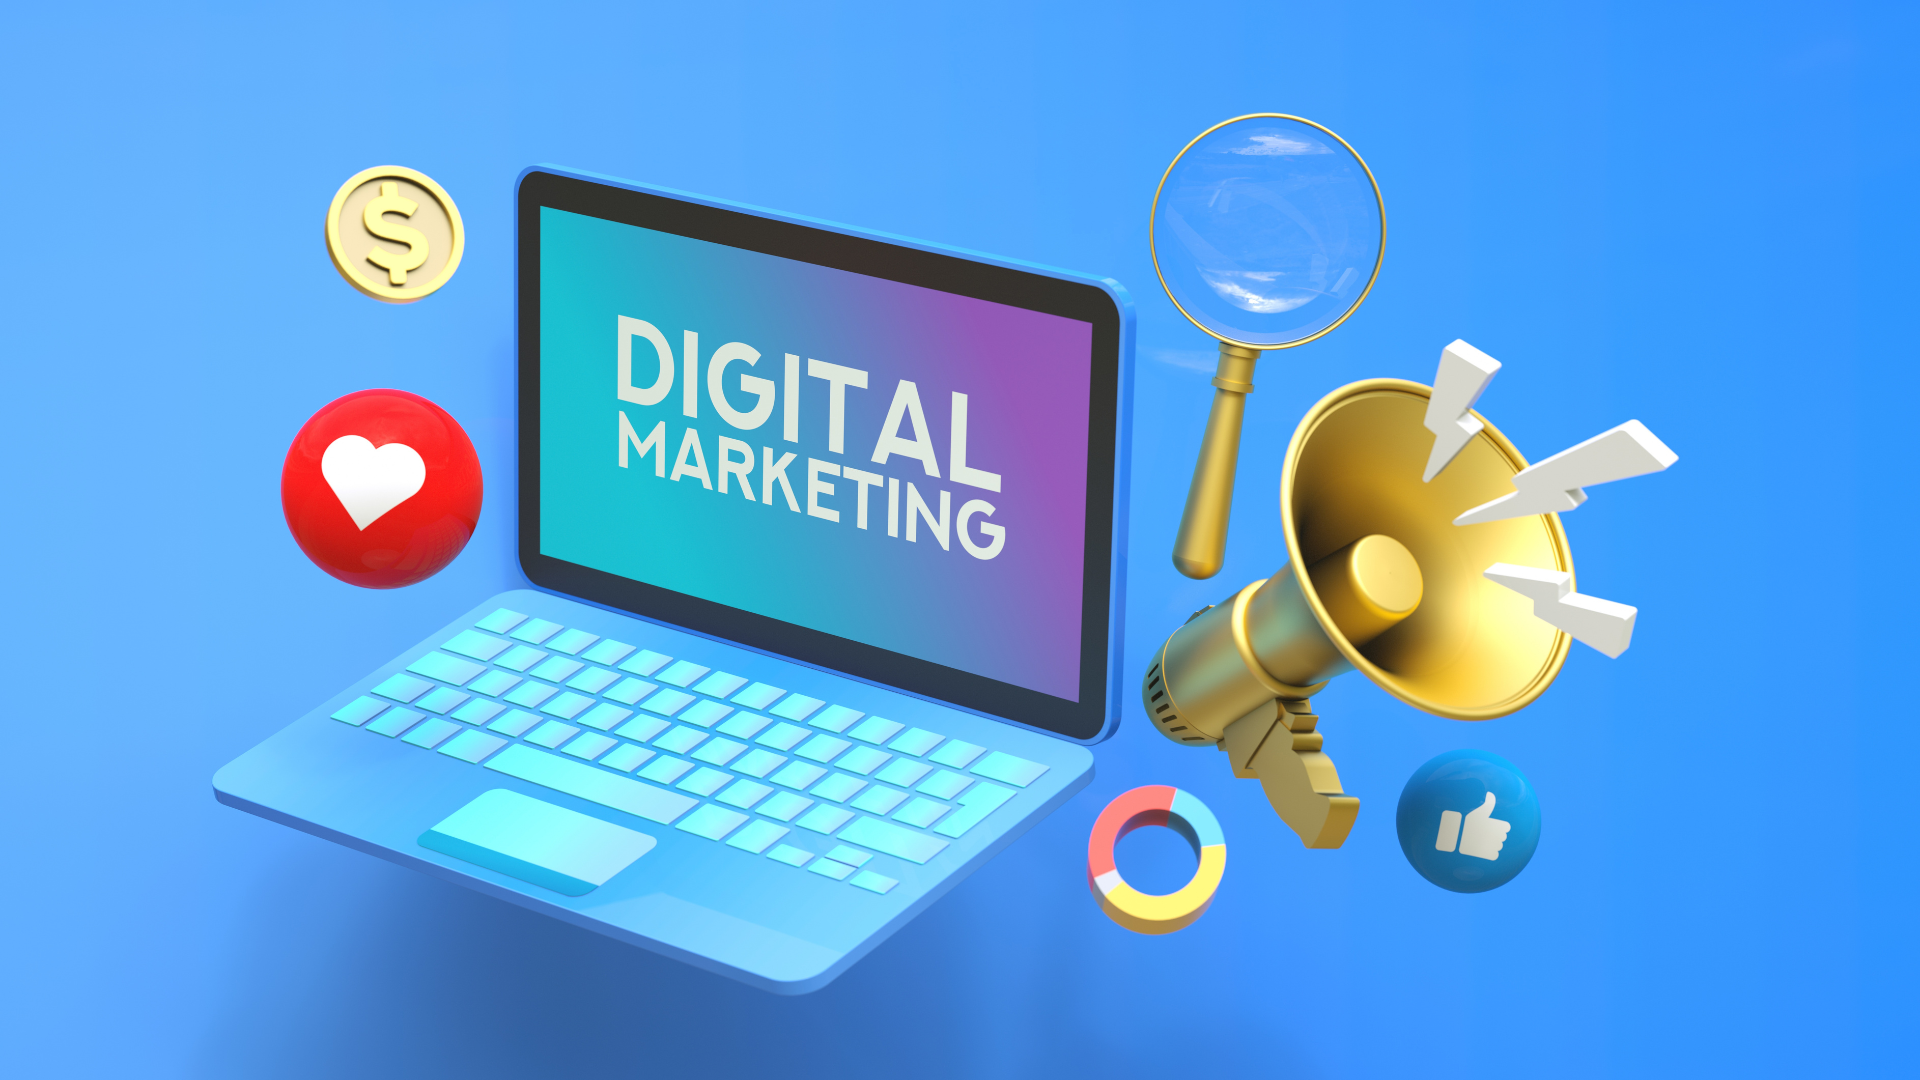 Digital Marketing Agency 101: Your Guide to Starting and Thriving in the Industry.